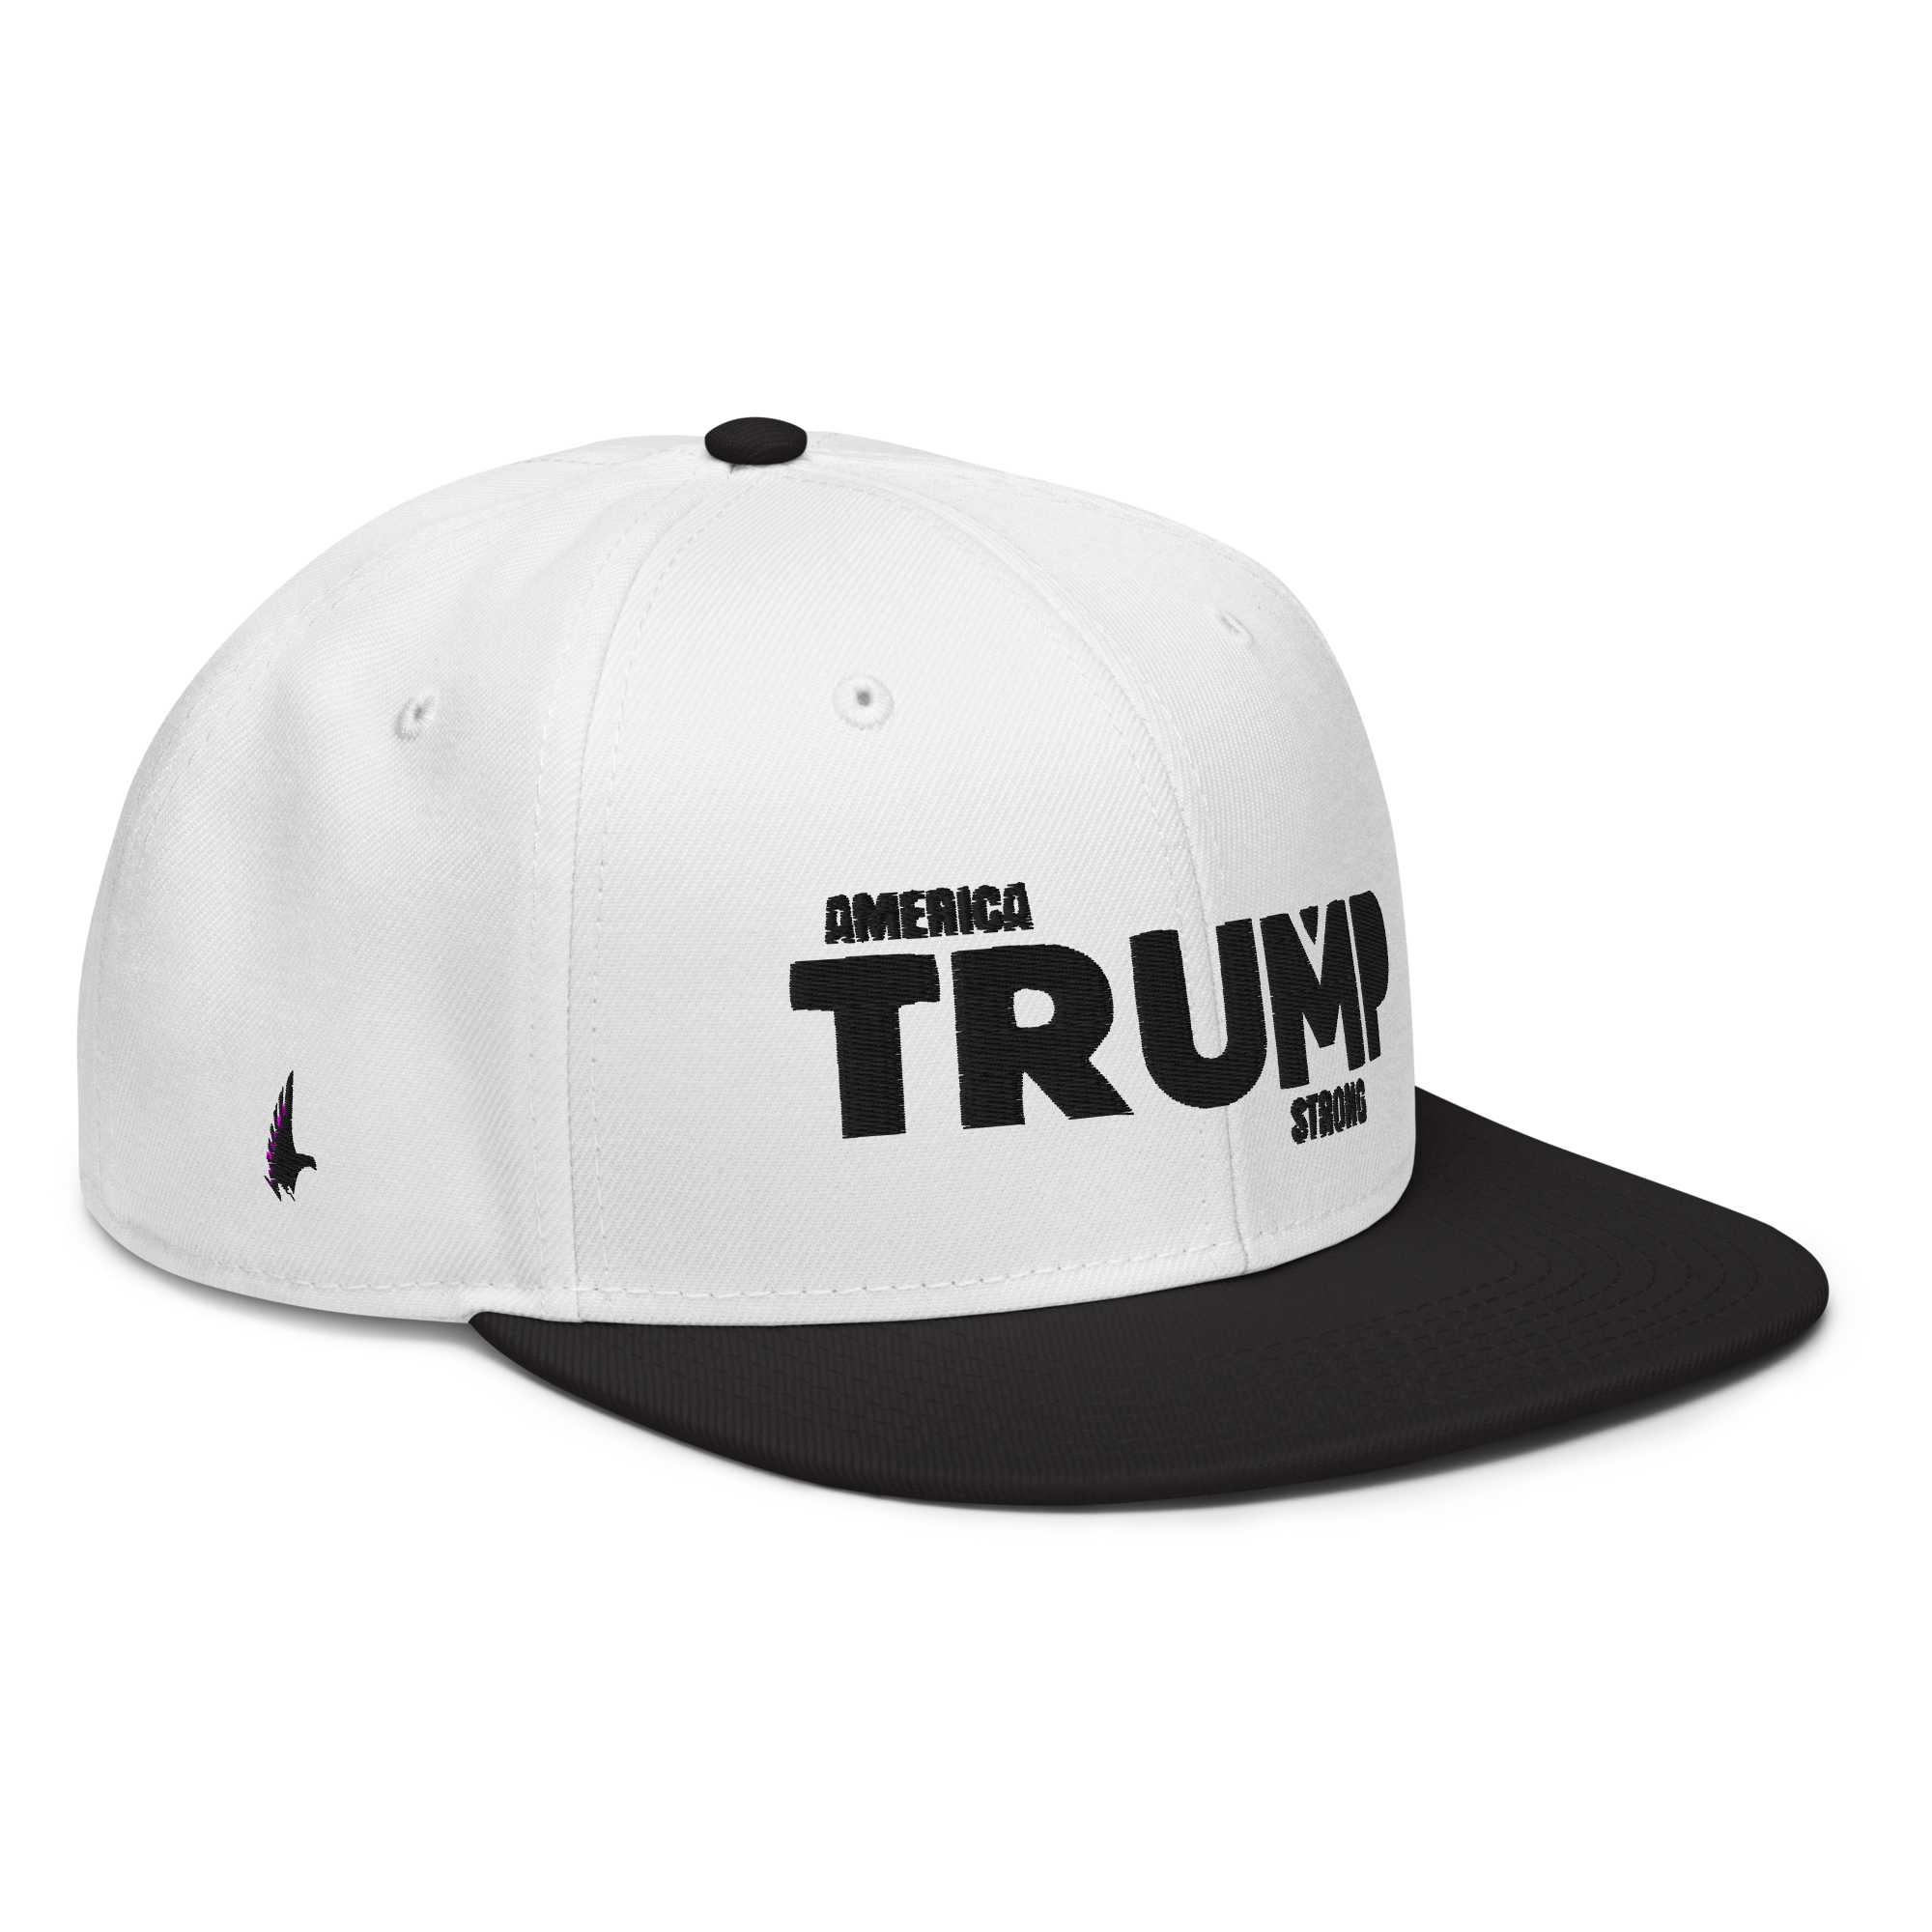 Loyalty Vibes America Trump Strong Snapback Hat White Black Black One size - Loyalty Vibes